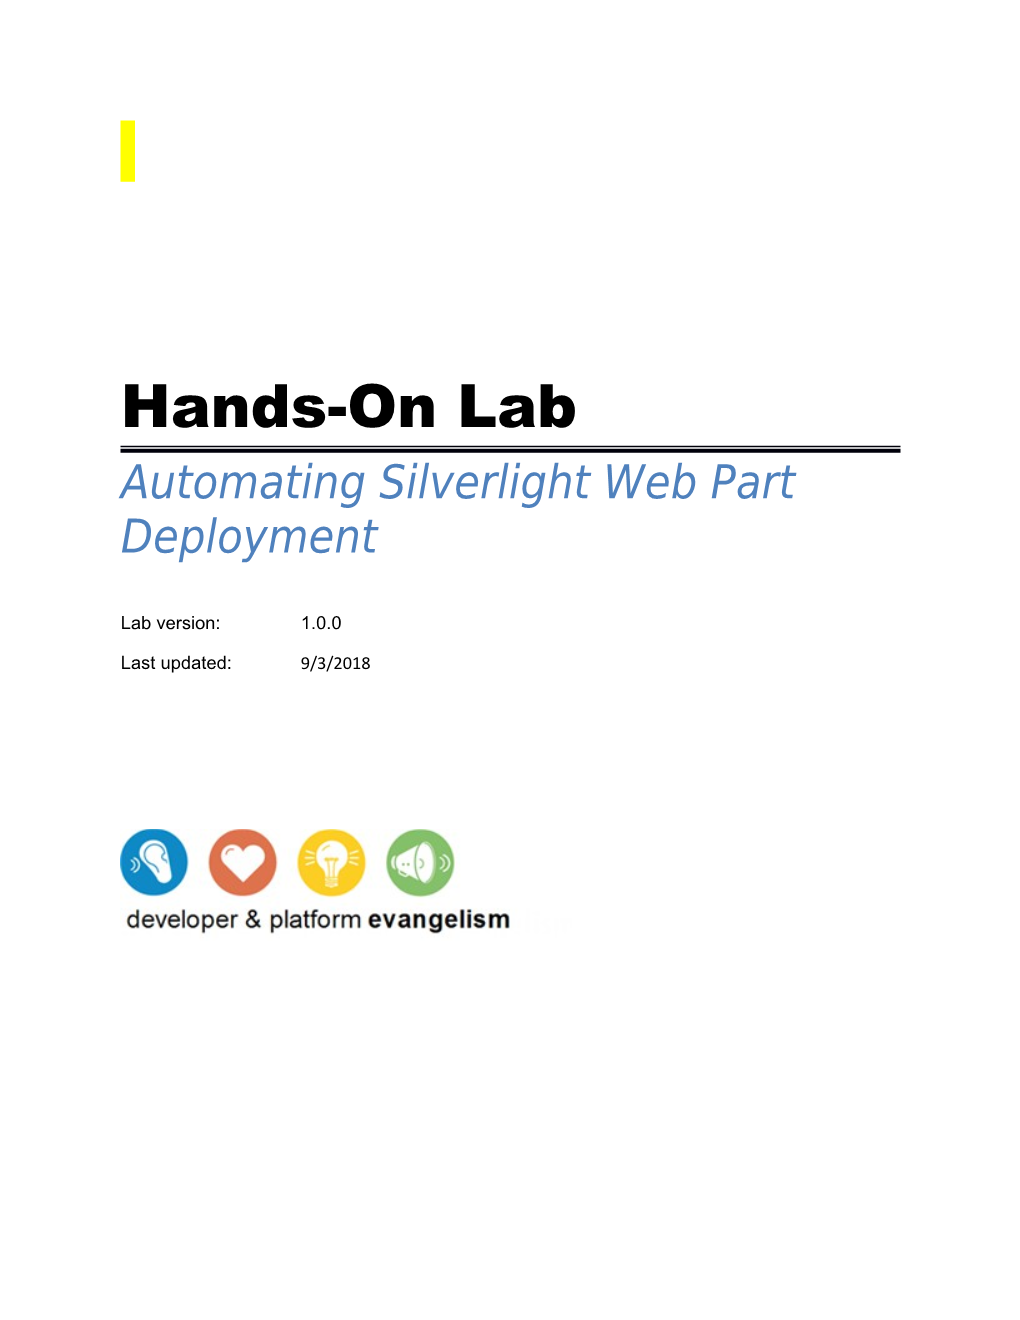 Automating Silverlight Web Part Deployment